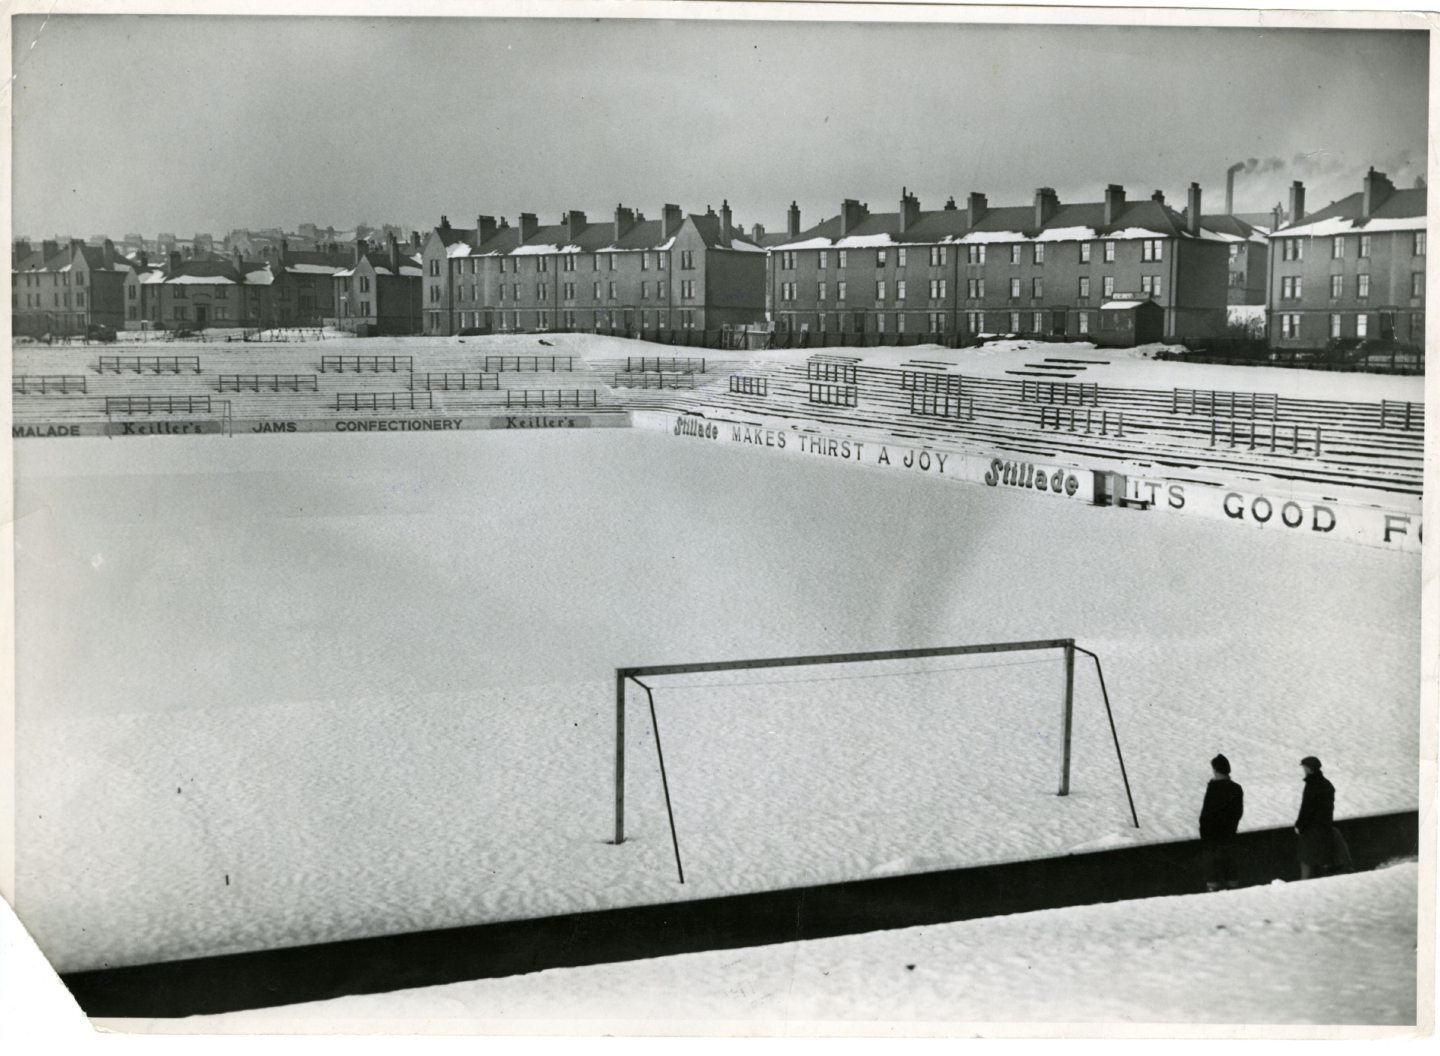 Tannadice Park covered in snow in January 1951.